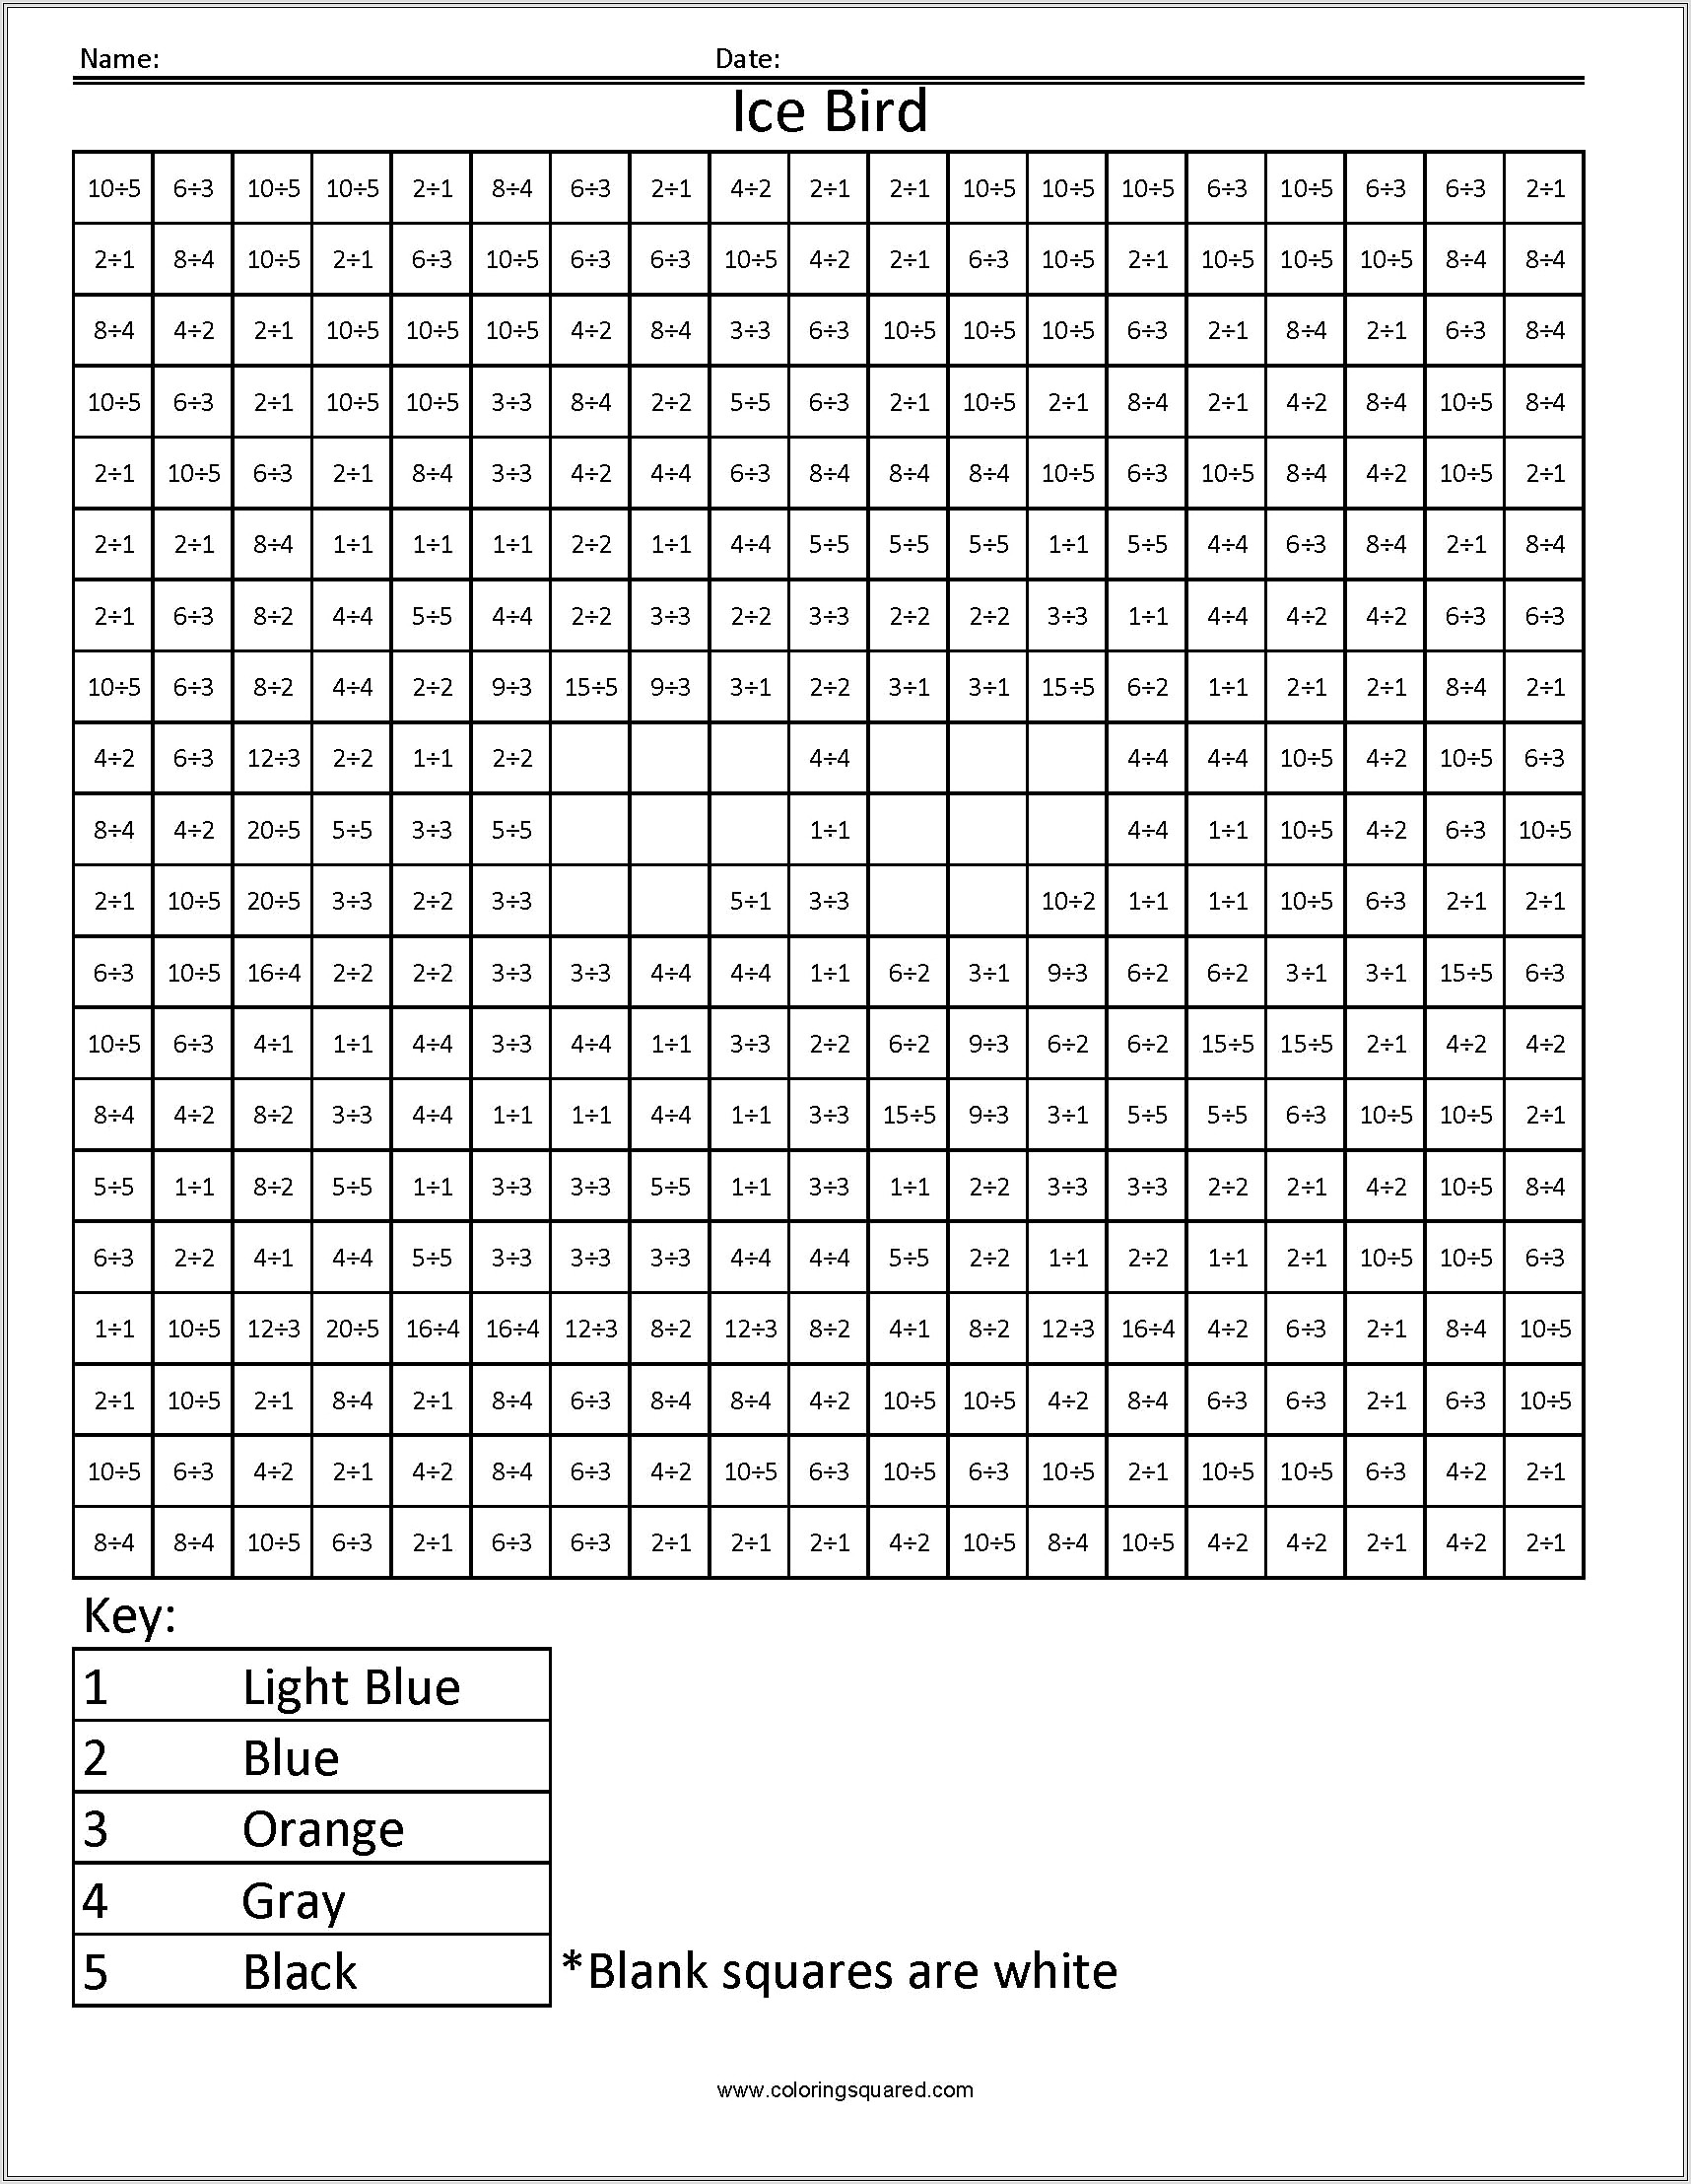 7 Times Table Colouring Worksheet